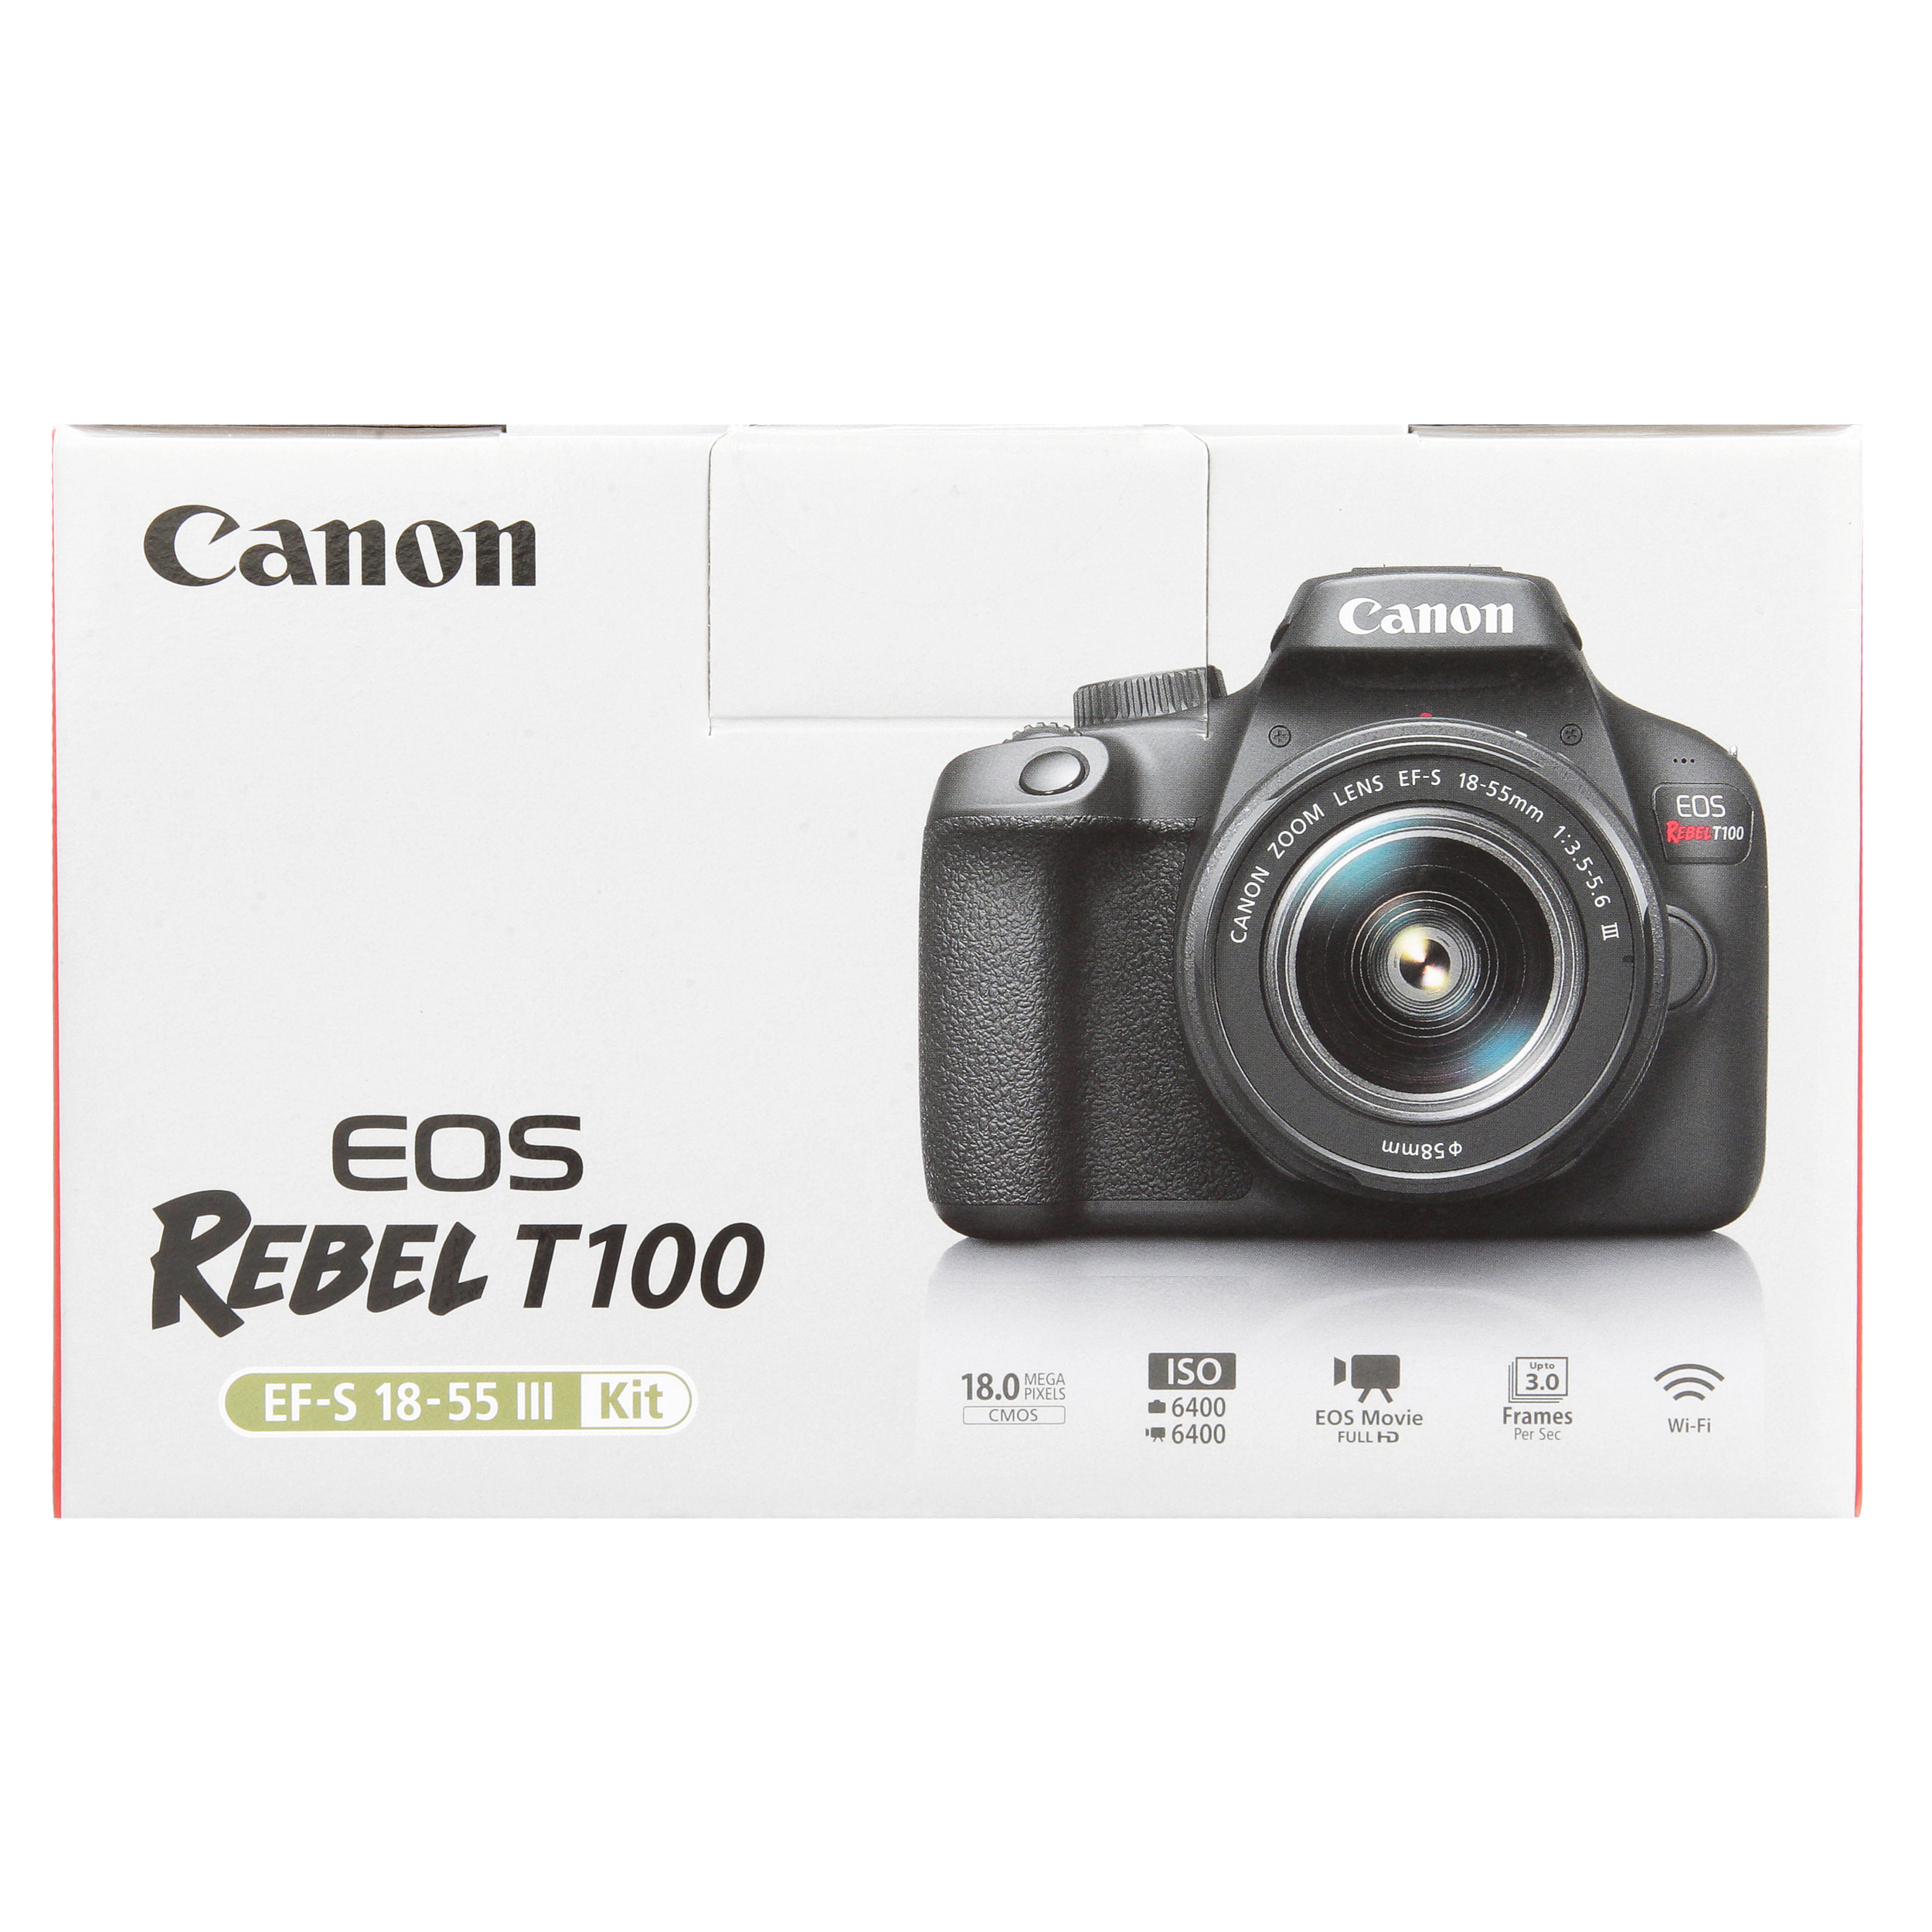 Canon EOS Rebel T100 Digital SLR Camera with 18-55mm Lens Kit + 32GB SD Card +Buzz-Photo Essential Bundle - image 3 of 4